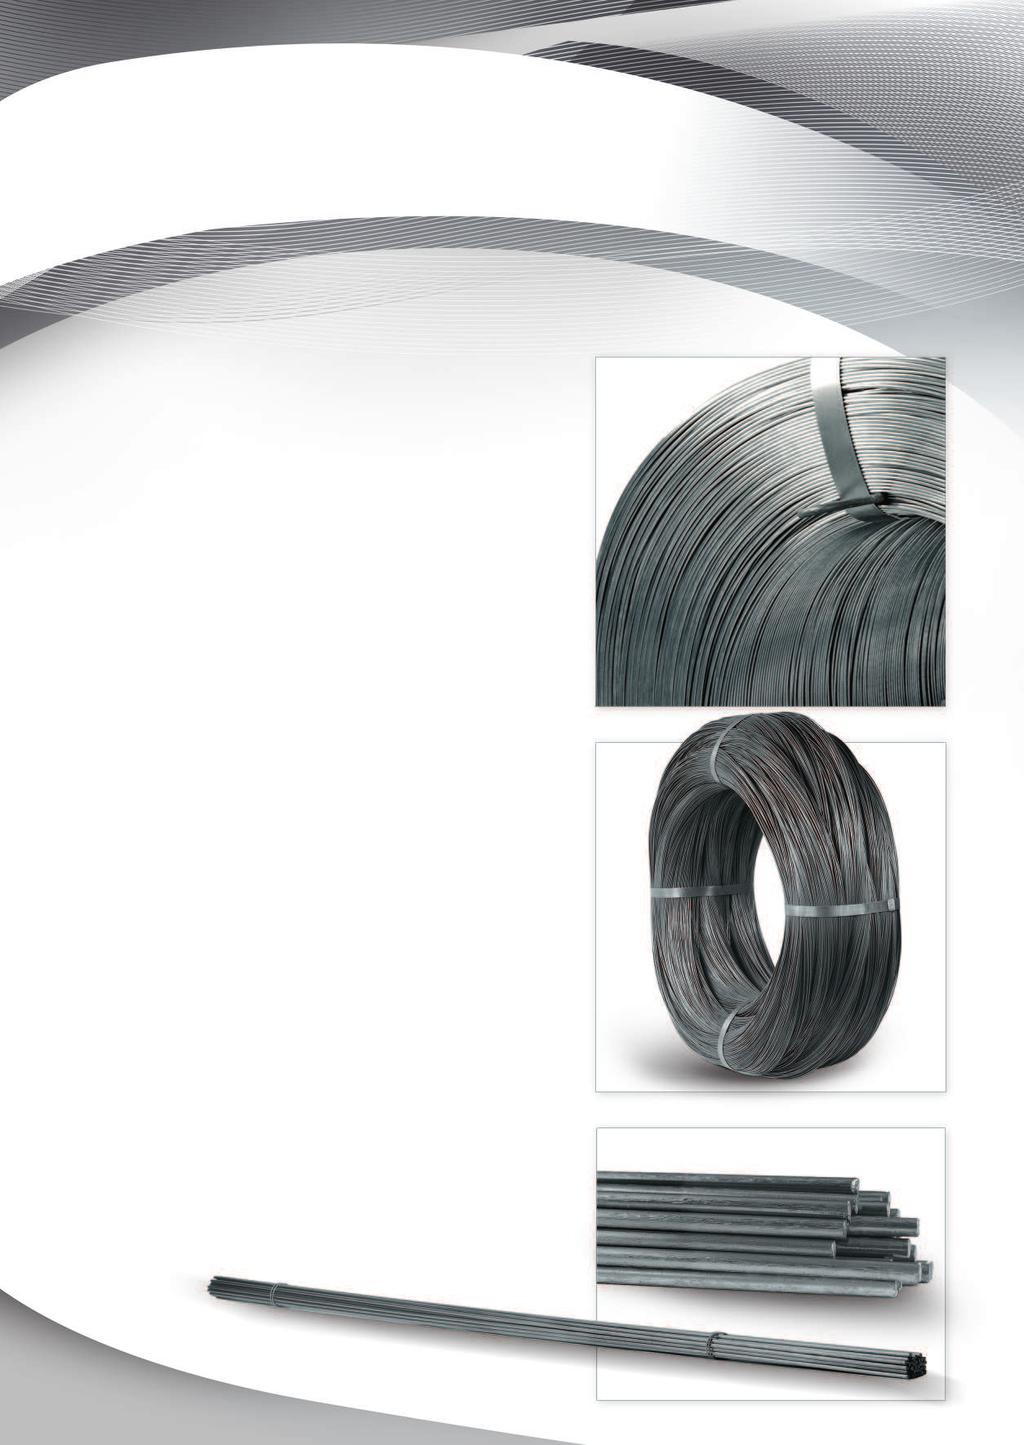 BARE WIRES Material: unalloyed, low-carbon steel according to PN-EN 10016-2; PN-EN 10025; ASTM A 510 M standards Hard wires WIRE DIAMETER: TENSILE STRENGTH: RANGE OF WEIGHT: TYPE OF PACKAGING: